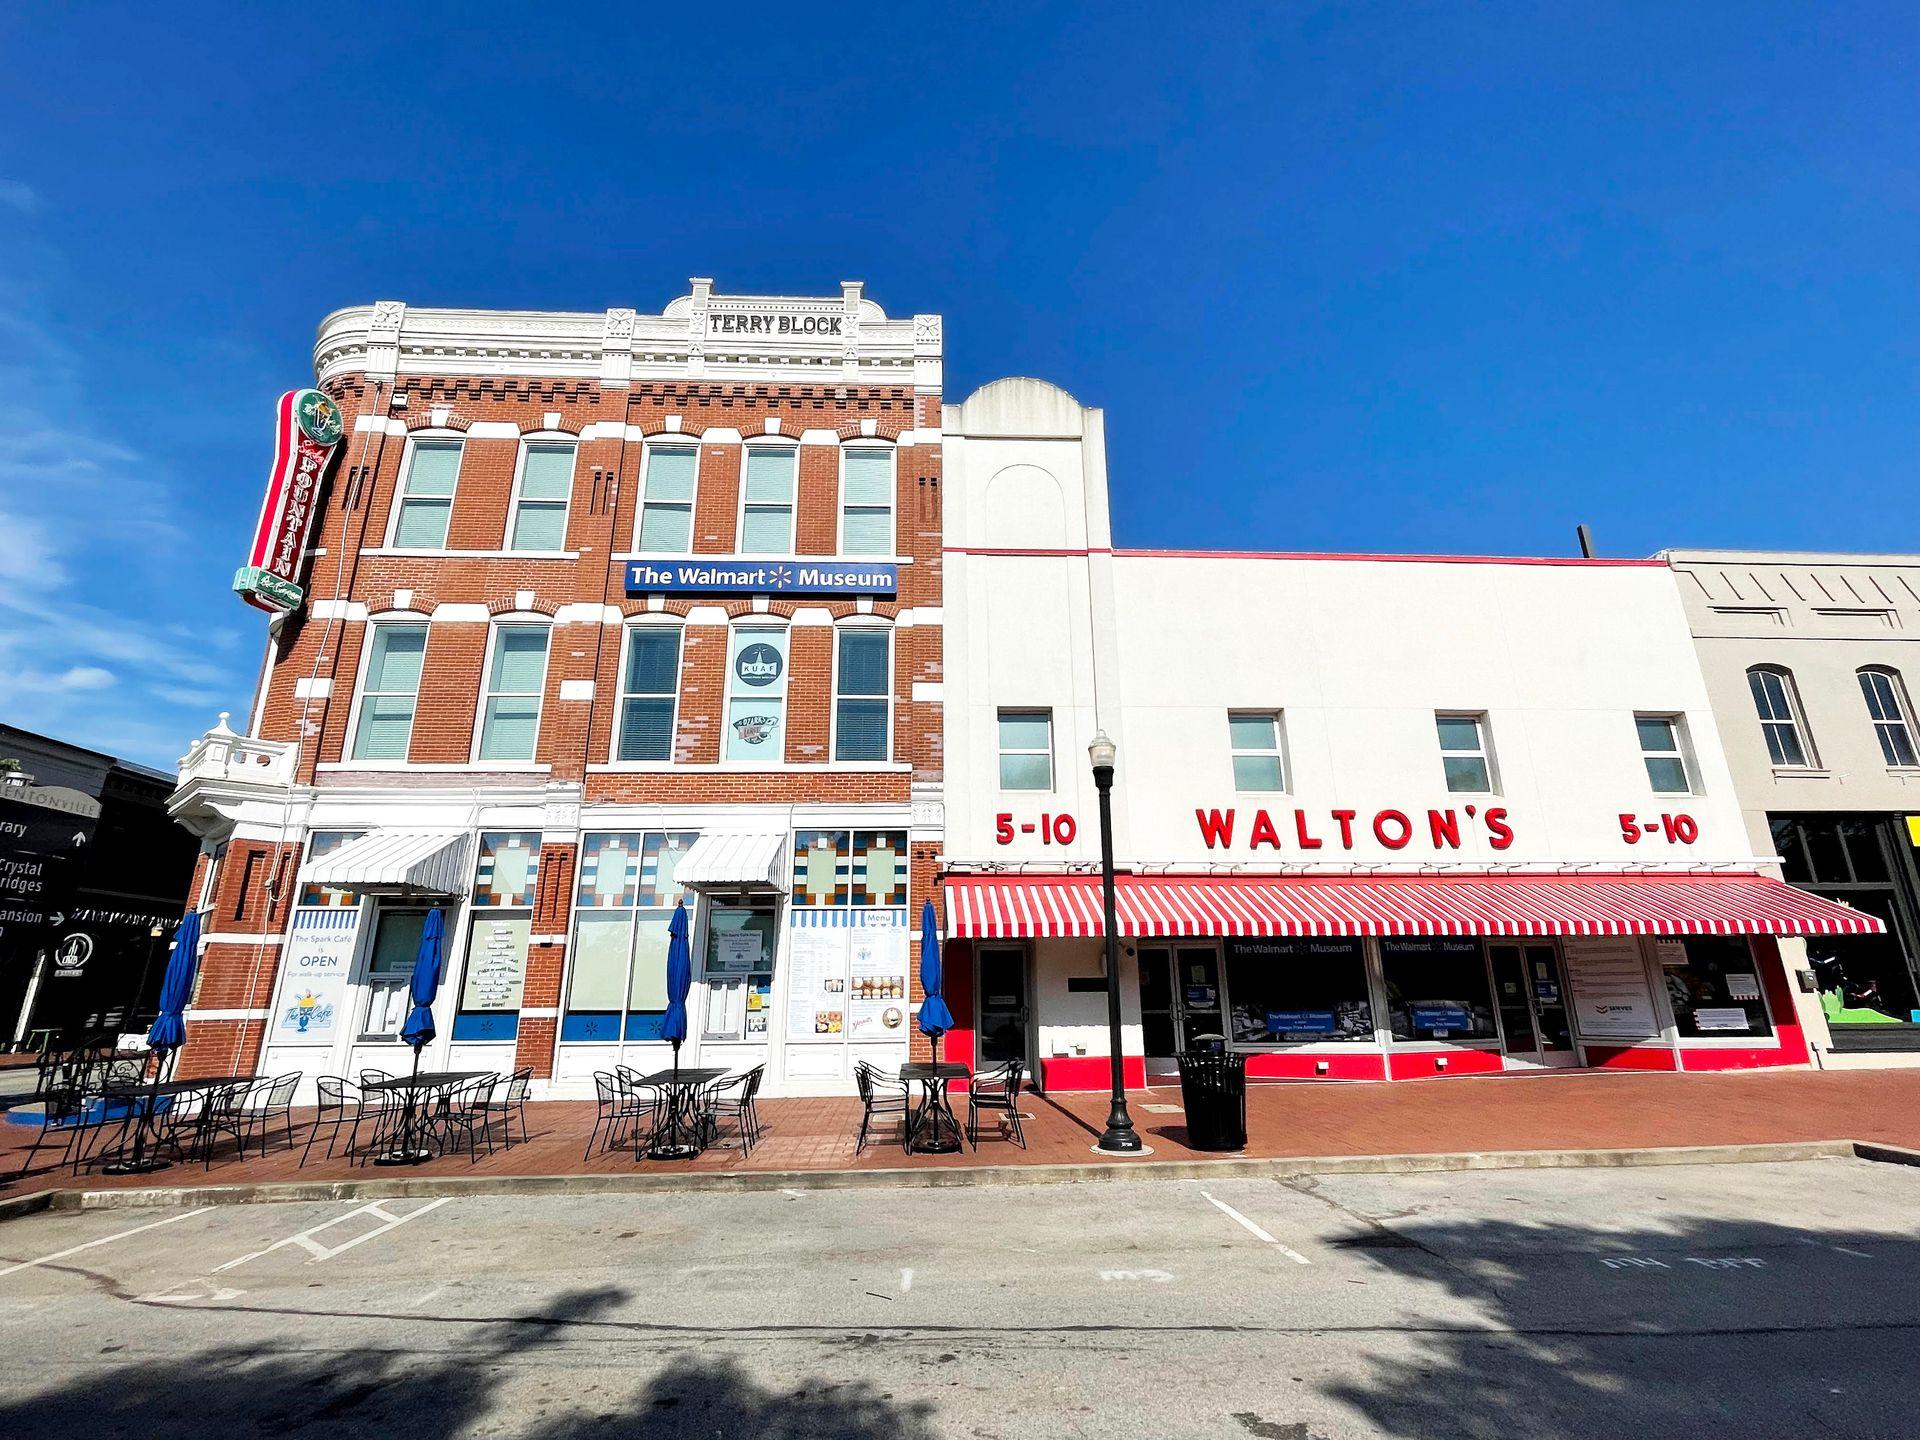 The exterior of the Walmart Museum and Walton's 5-10. The corner building is two stories tall made of brick, while Walton's is a white storefront with red letters.